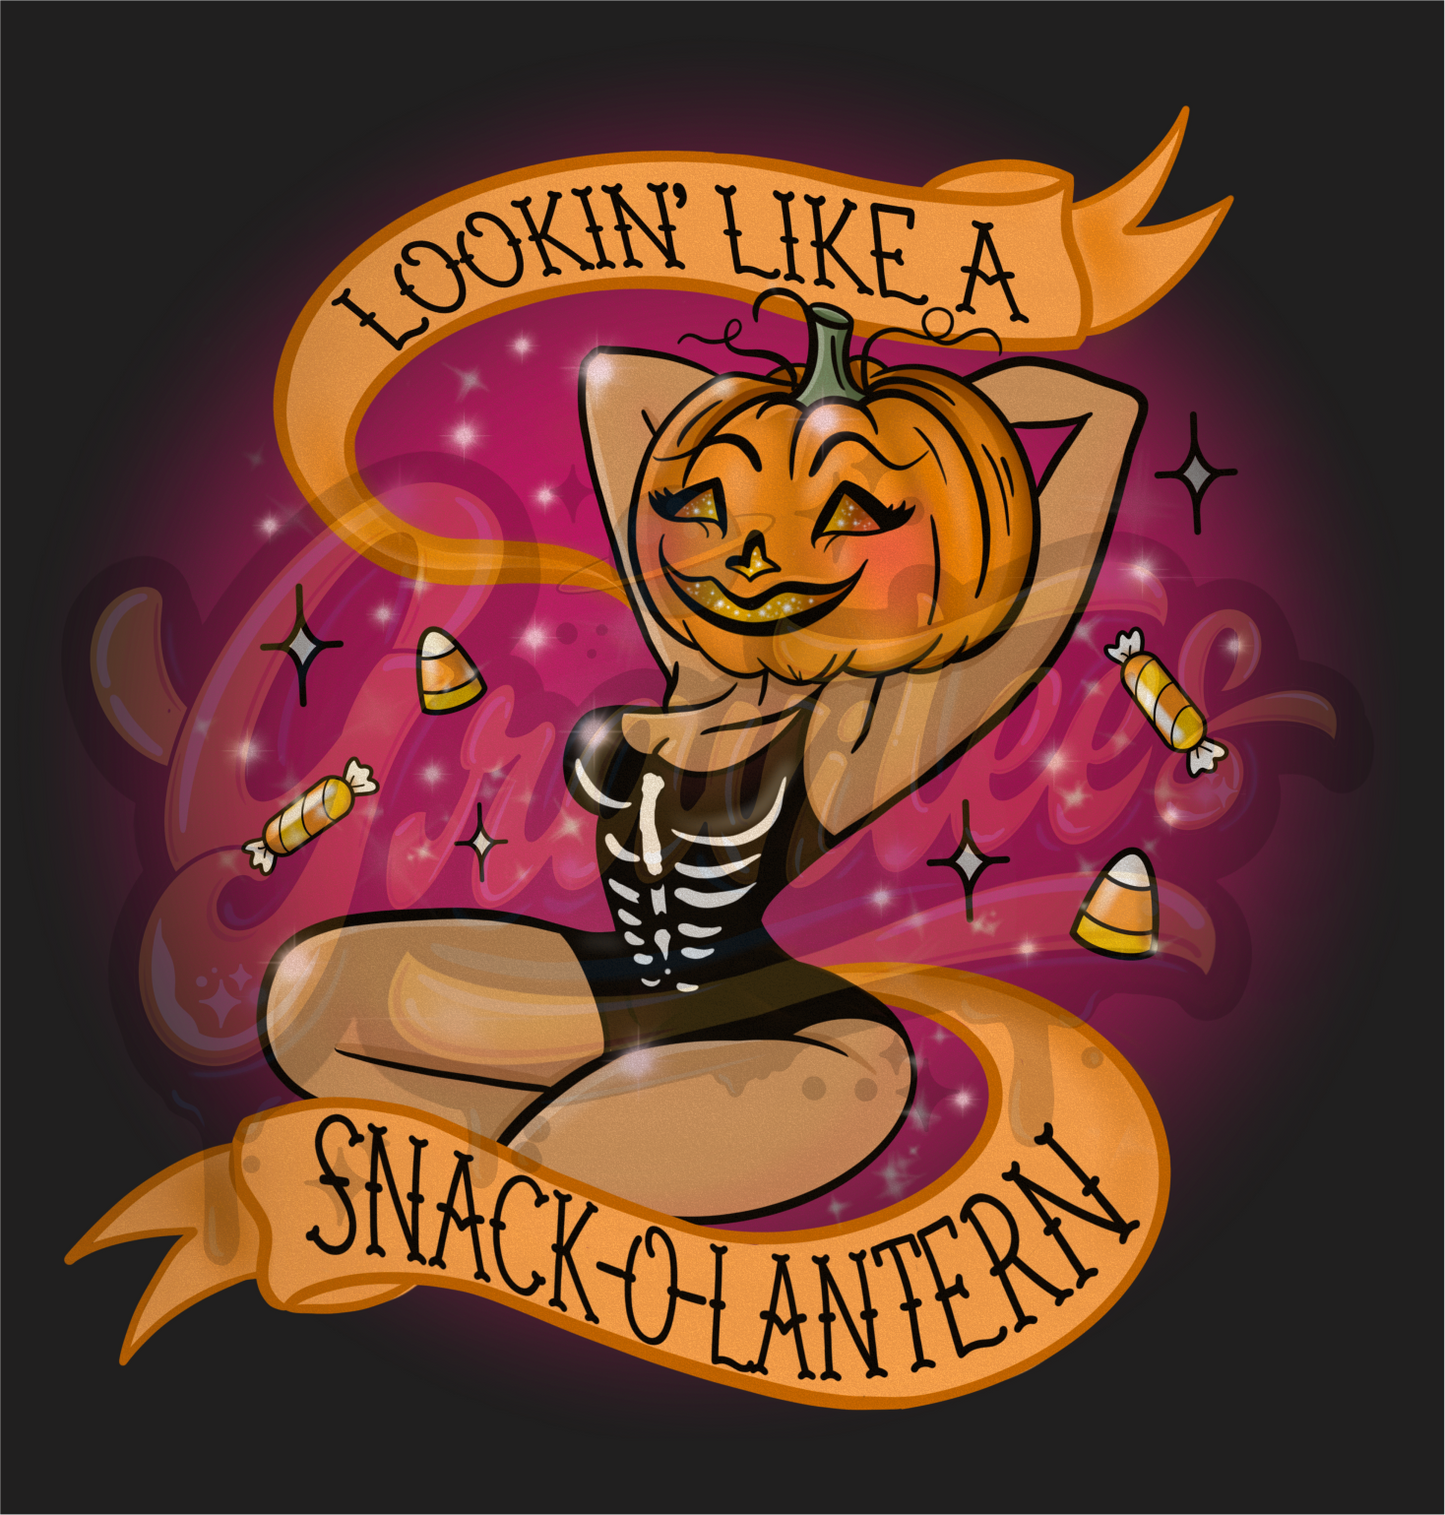 Looking Like A Snack-O-Lantern PNG, Sexy Pumpkin Clipart for DTF or Shirt Printing, Halloween Sublimation, PNG Only!